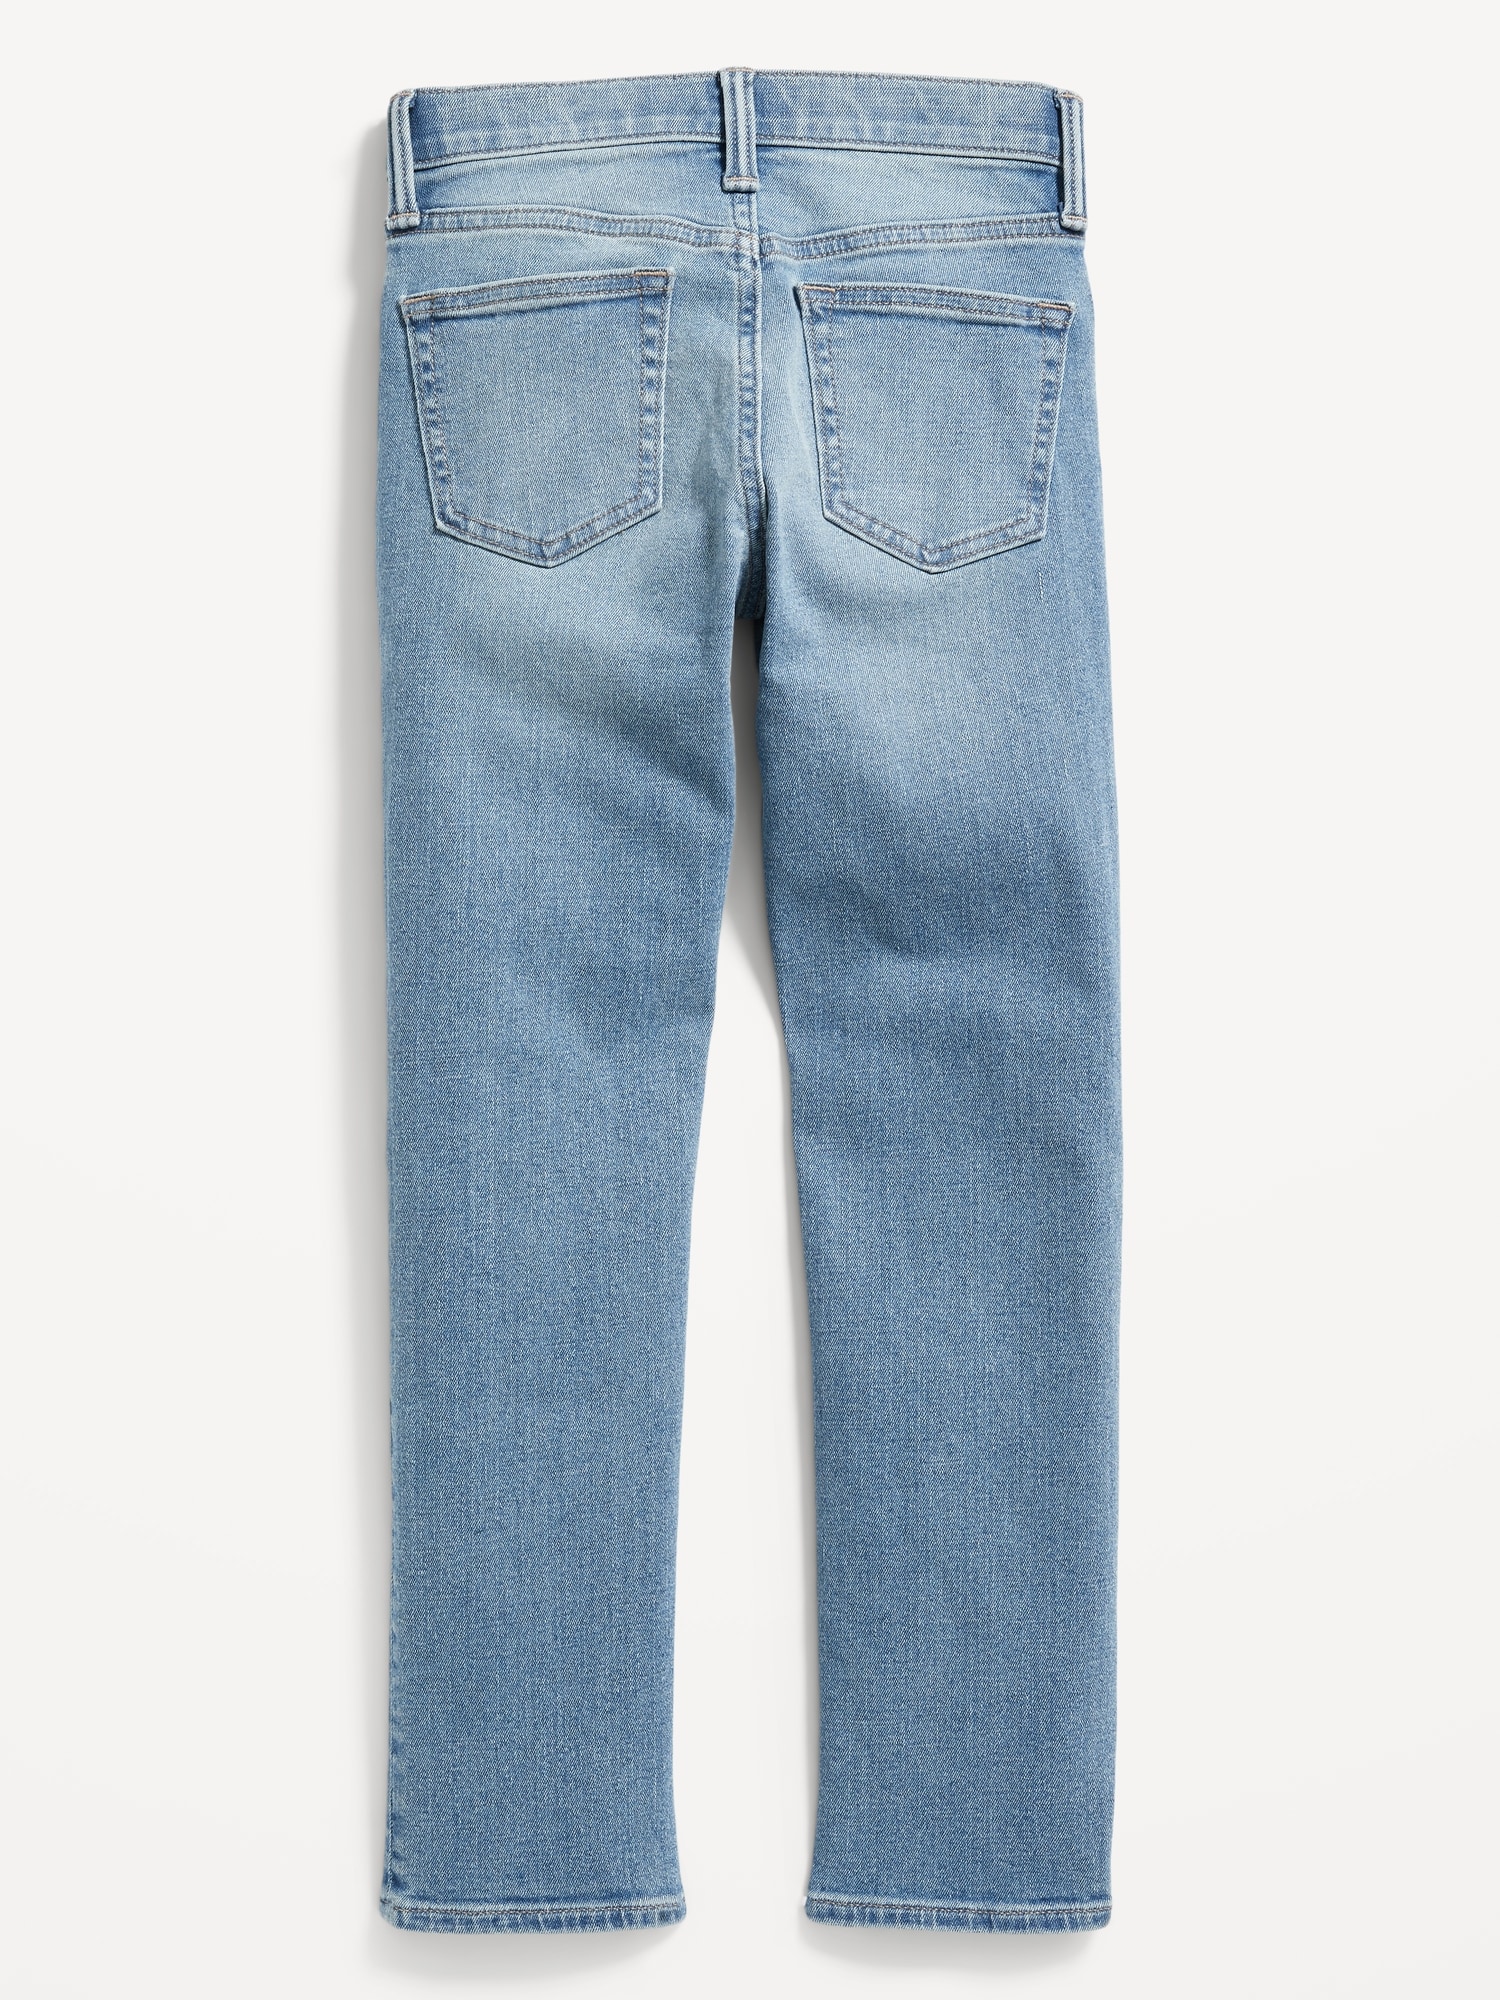 Slim 360° Stretch Ripped Jeans for Boys | Old Navy